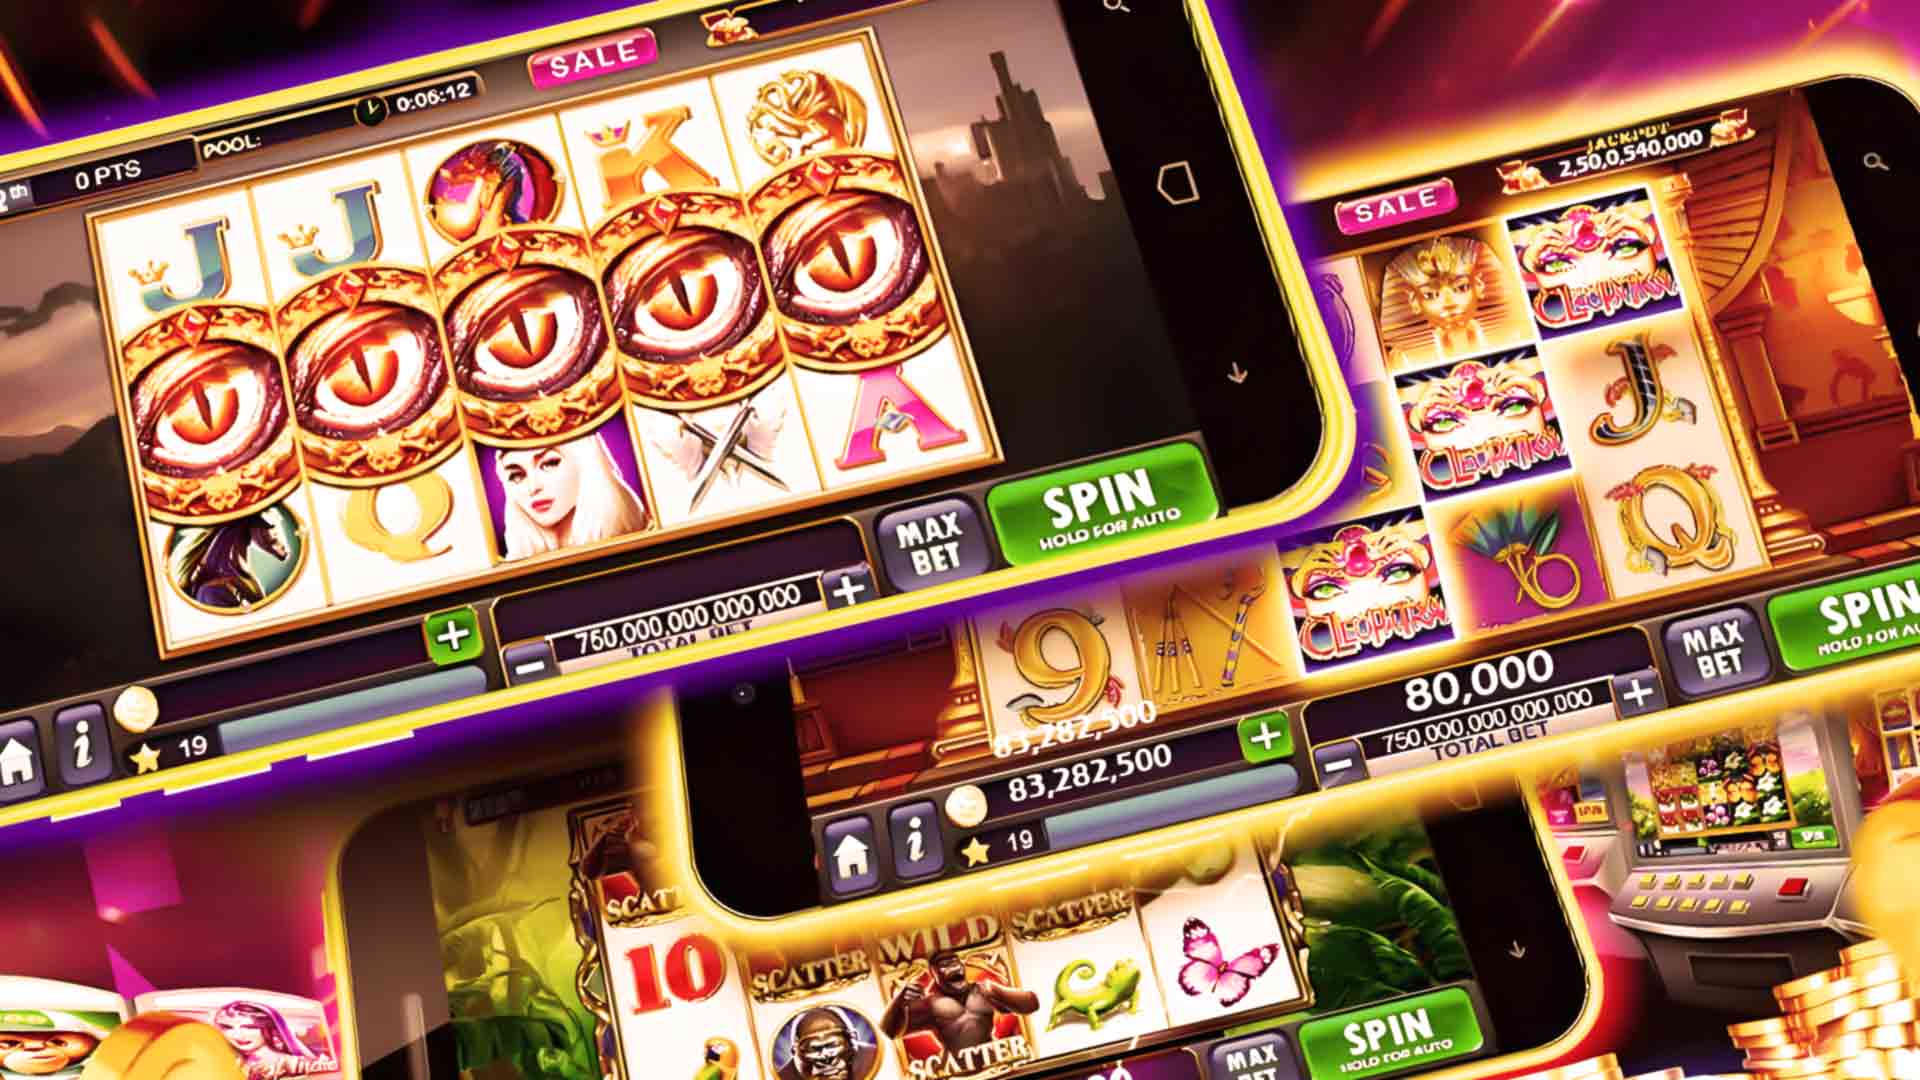 Mobile casino games on devices